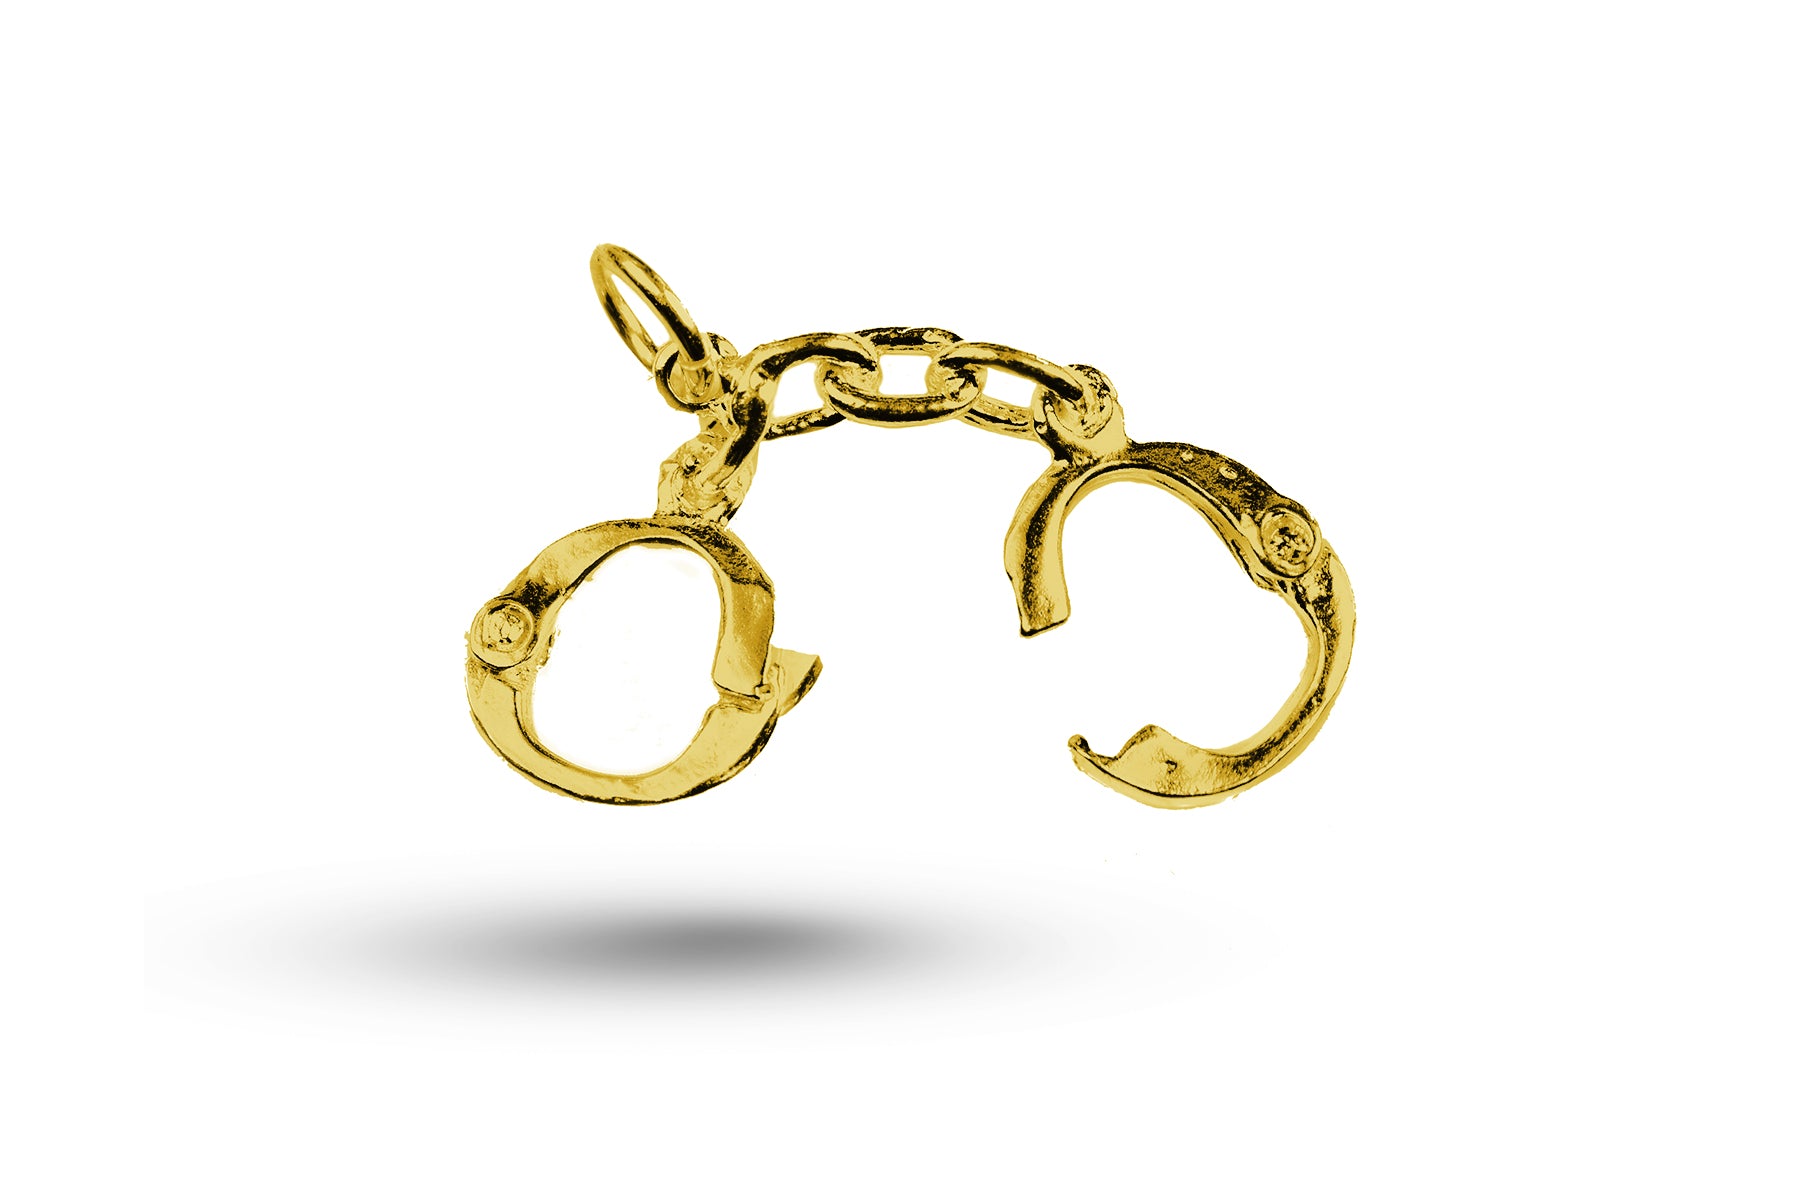 Yellow gold Handcuffs and Keys charm.